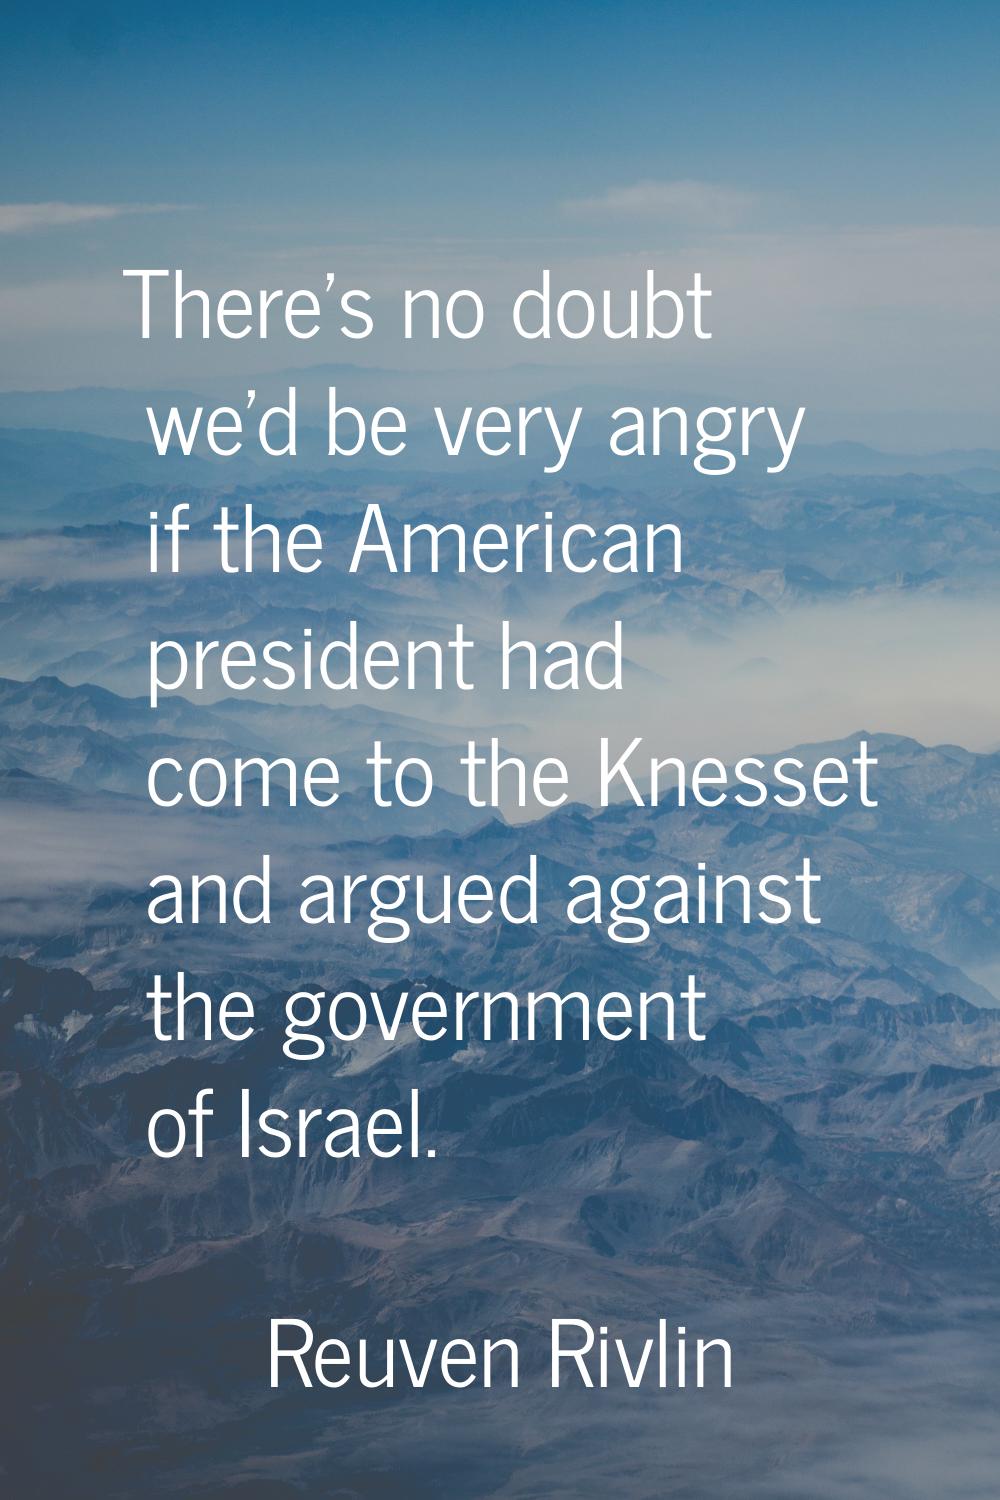 There's no doubt we'd be very angry if the American president had come to the Knesset and argued ag